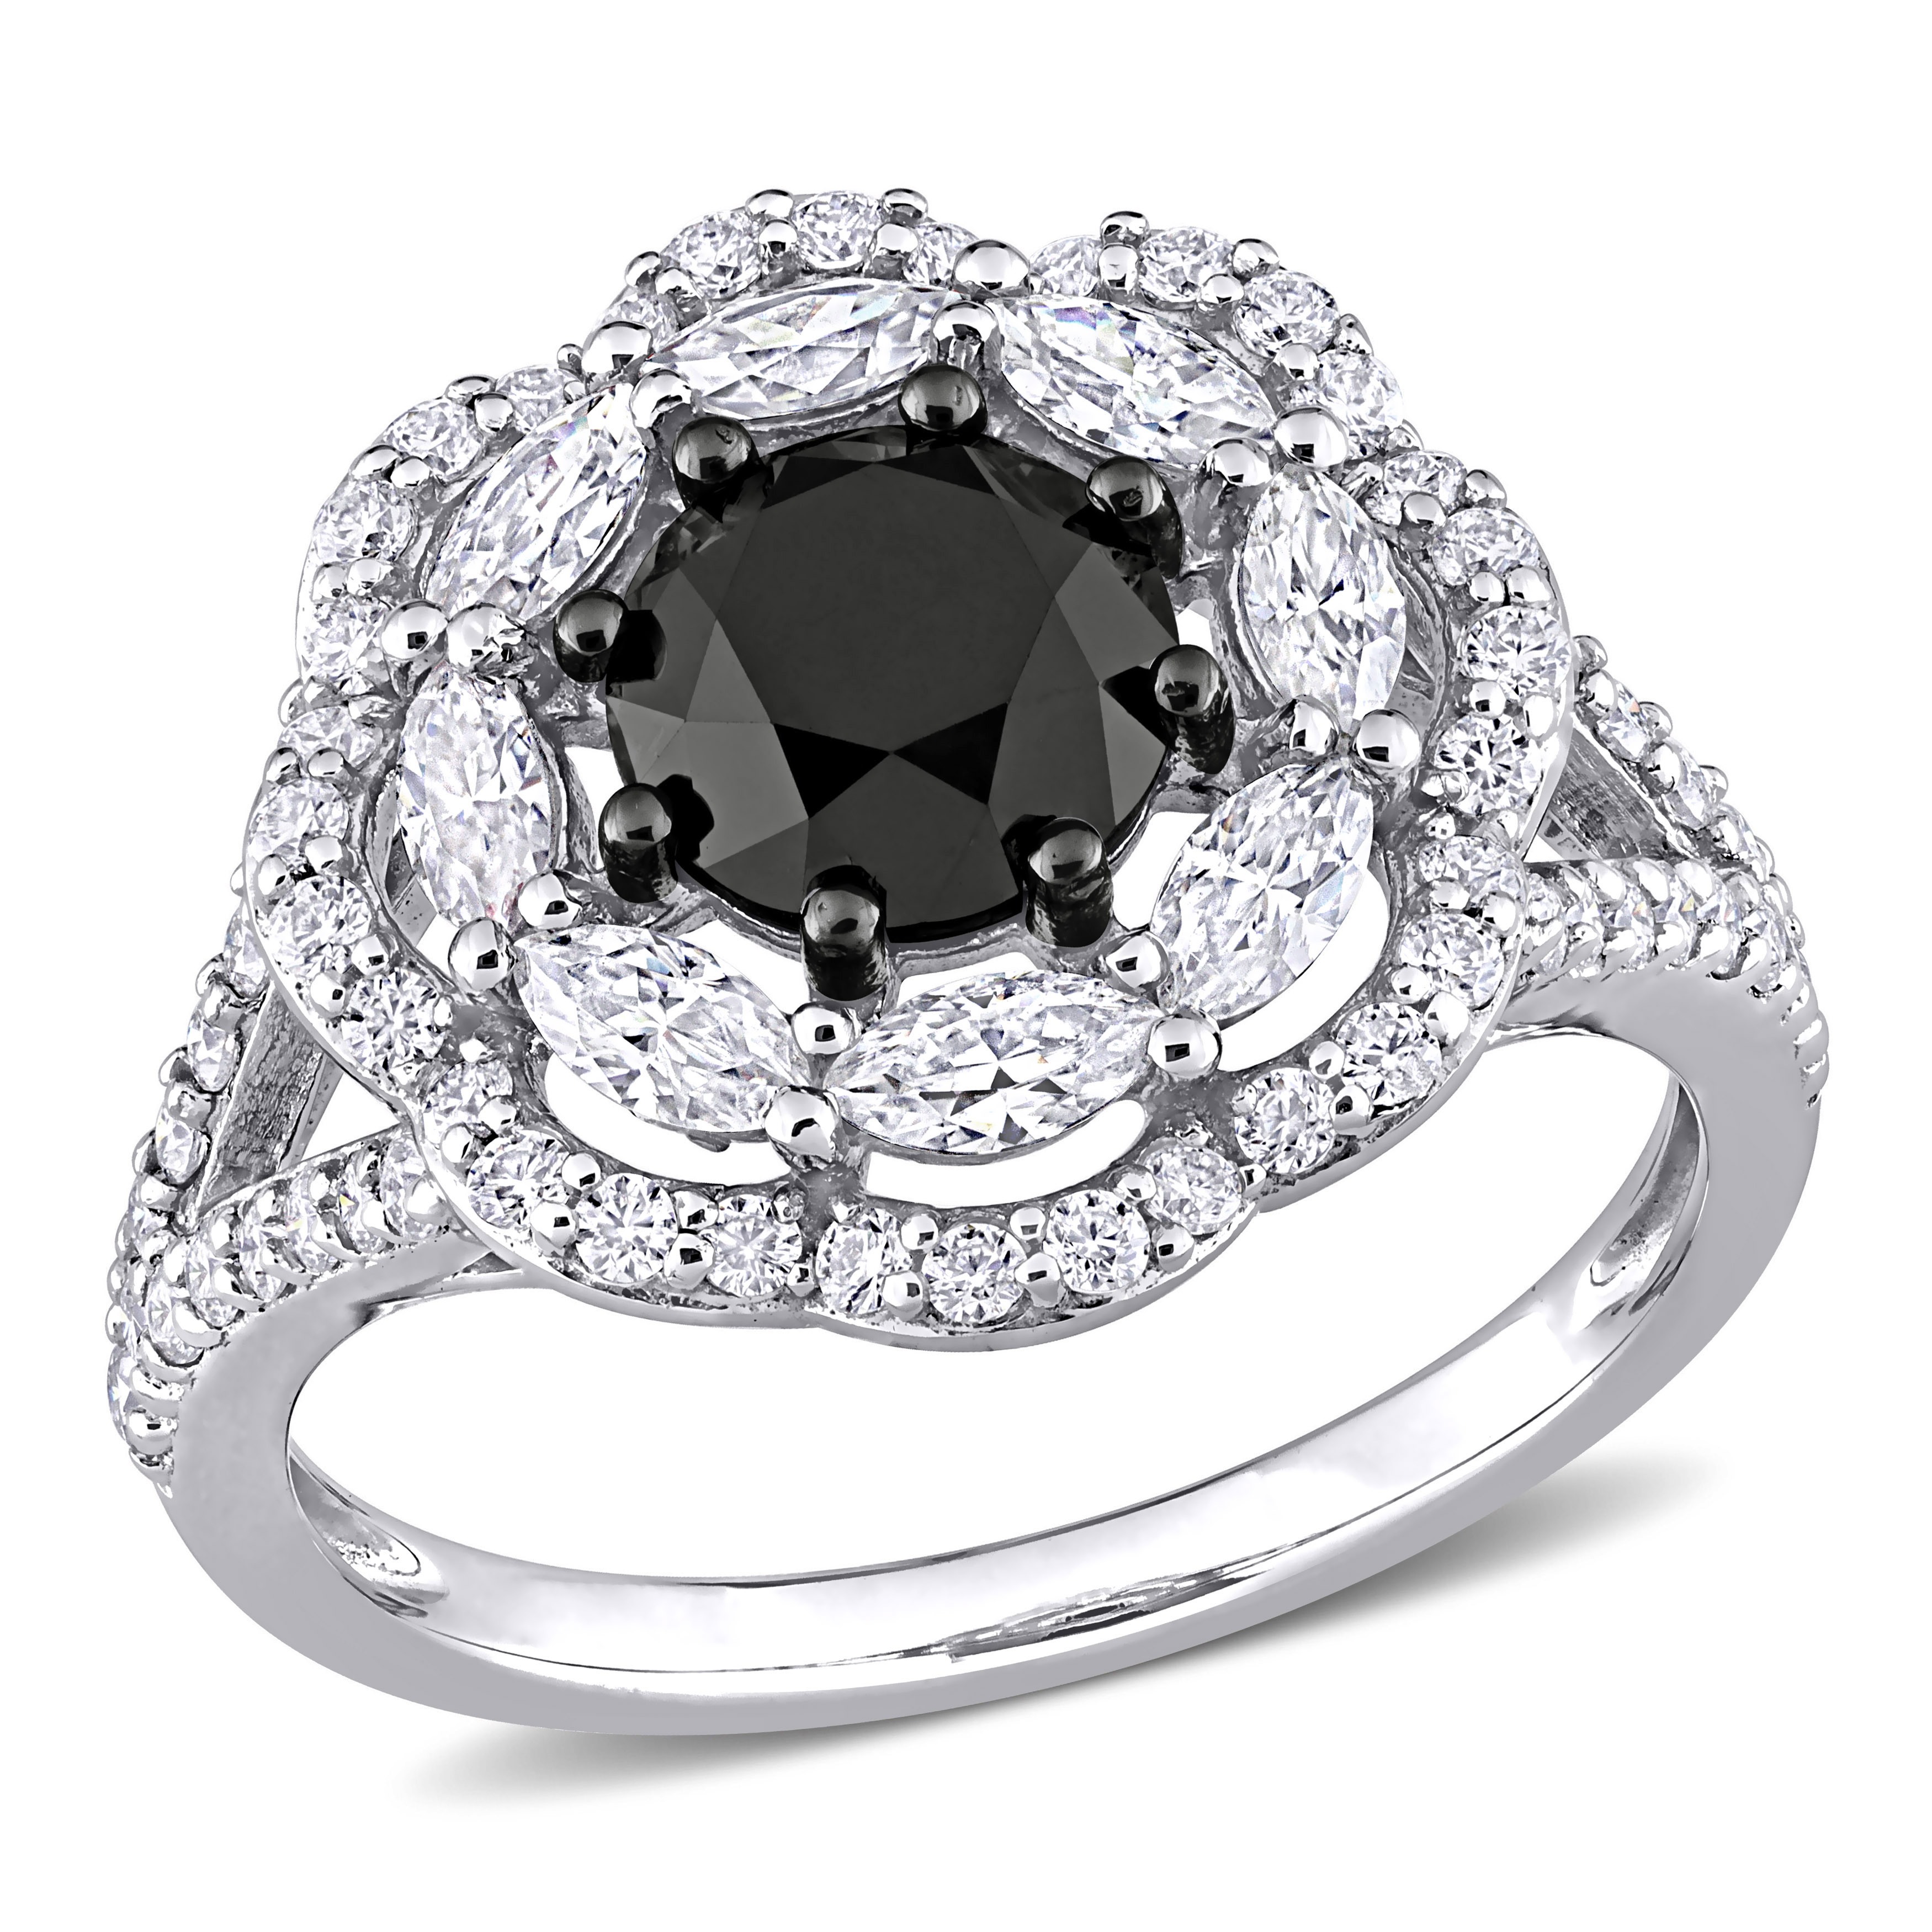 1 3/4 CT DEW Created Moissanite and 1 1/2 CT TW Black Diamond Engagement Ring in 10k White Gold